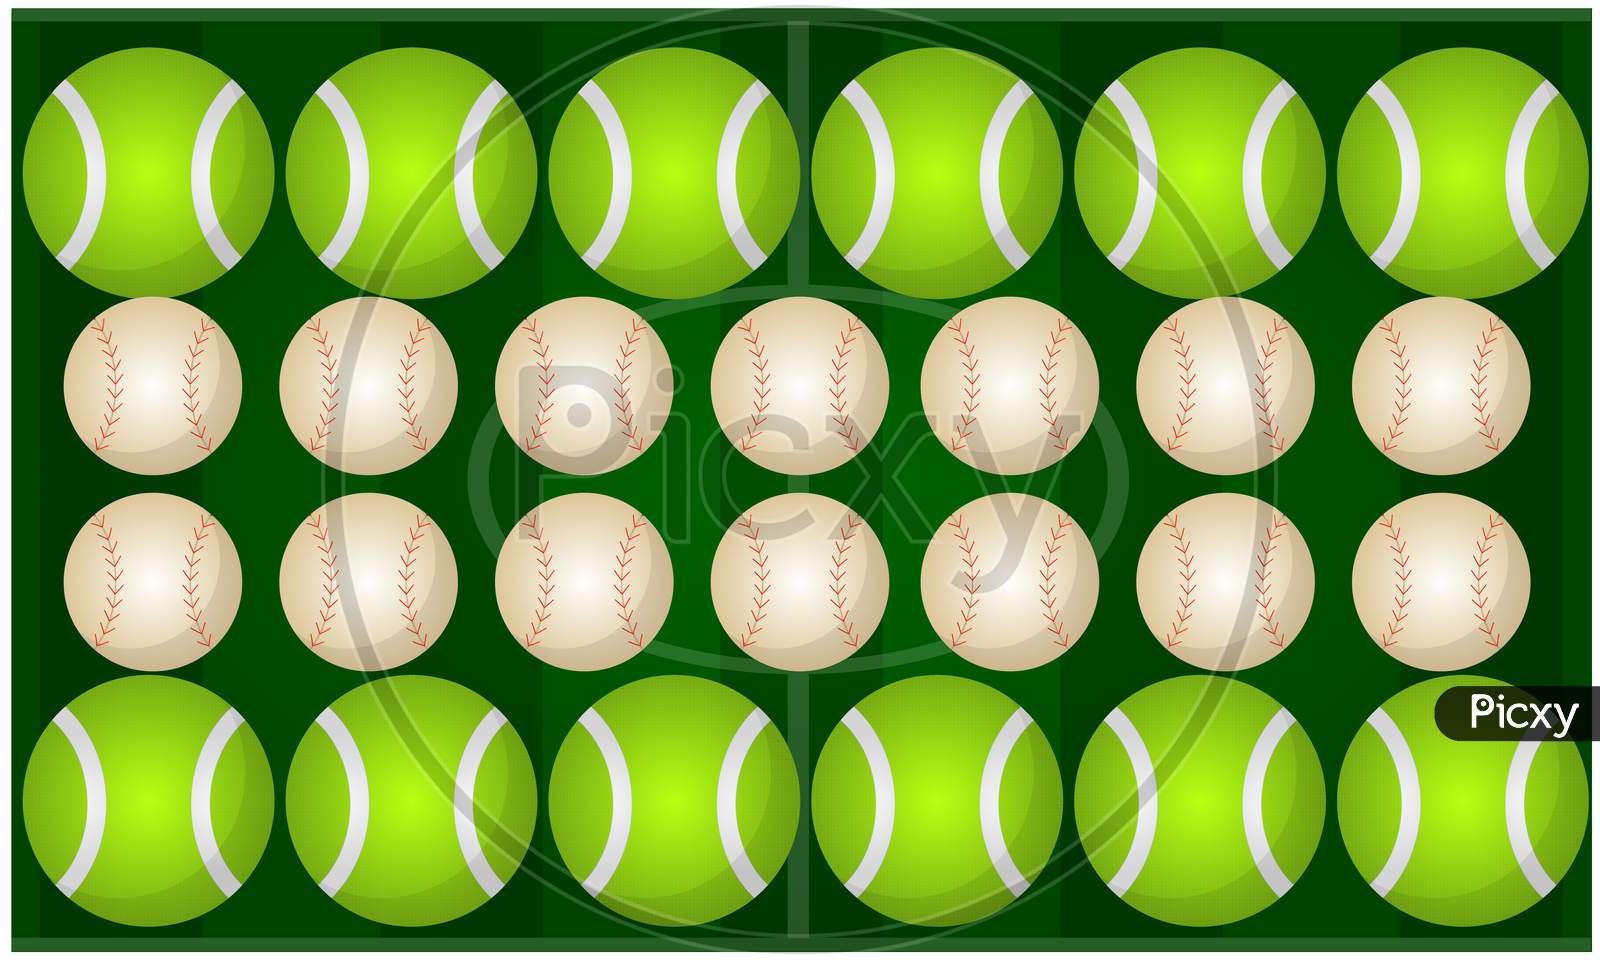 Digital Textile Design Of Different Balls On Abstract Background